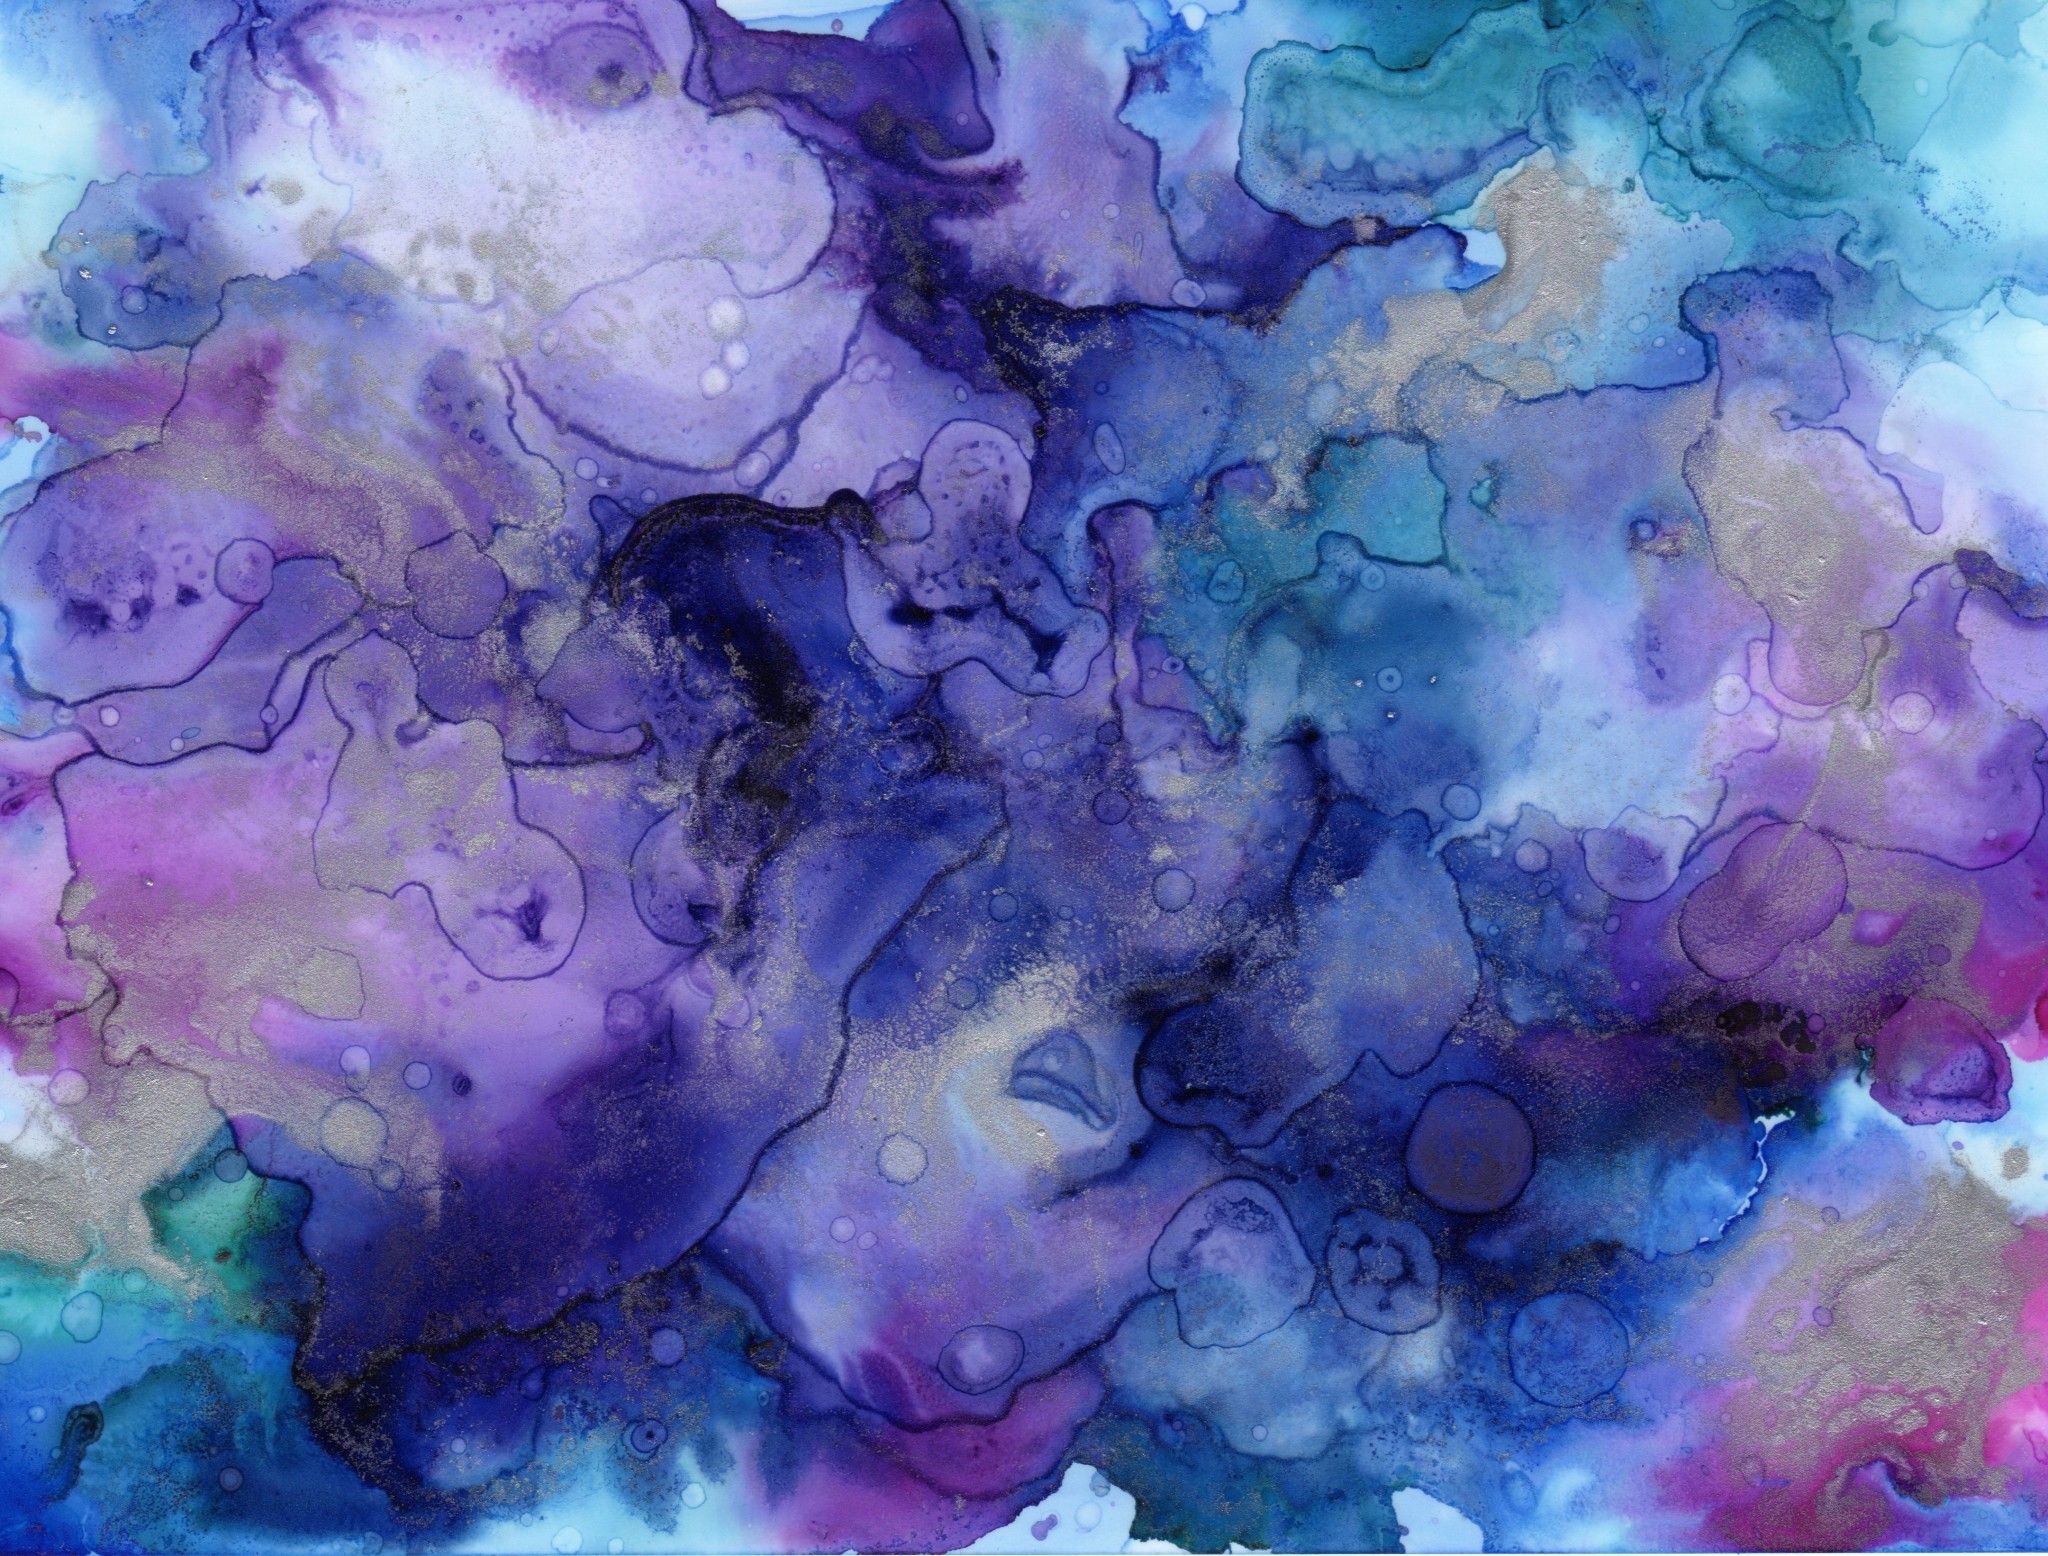 2048x1556 Download 2048x1556 Watercolor Artwork Pattern Stain